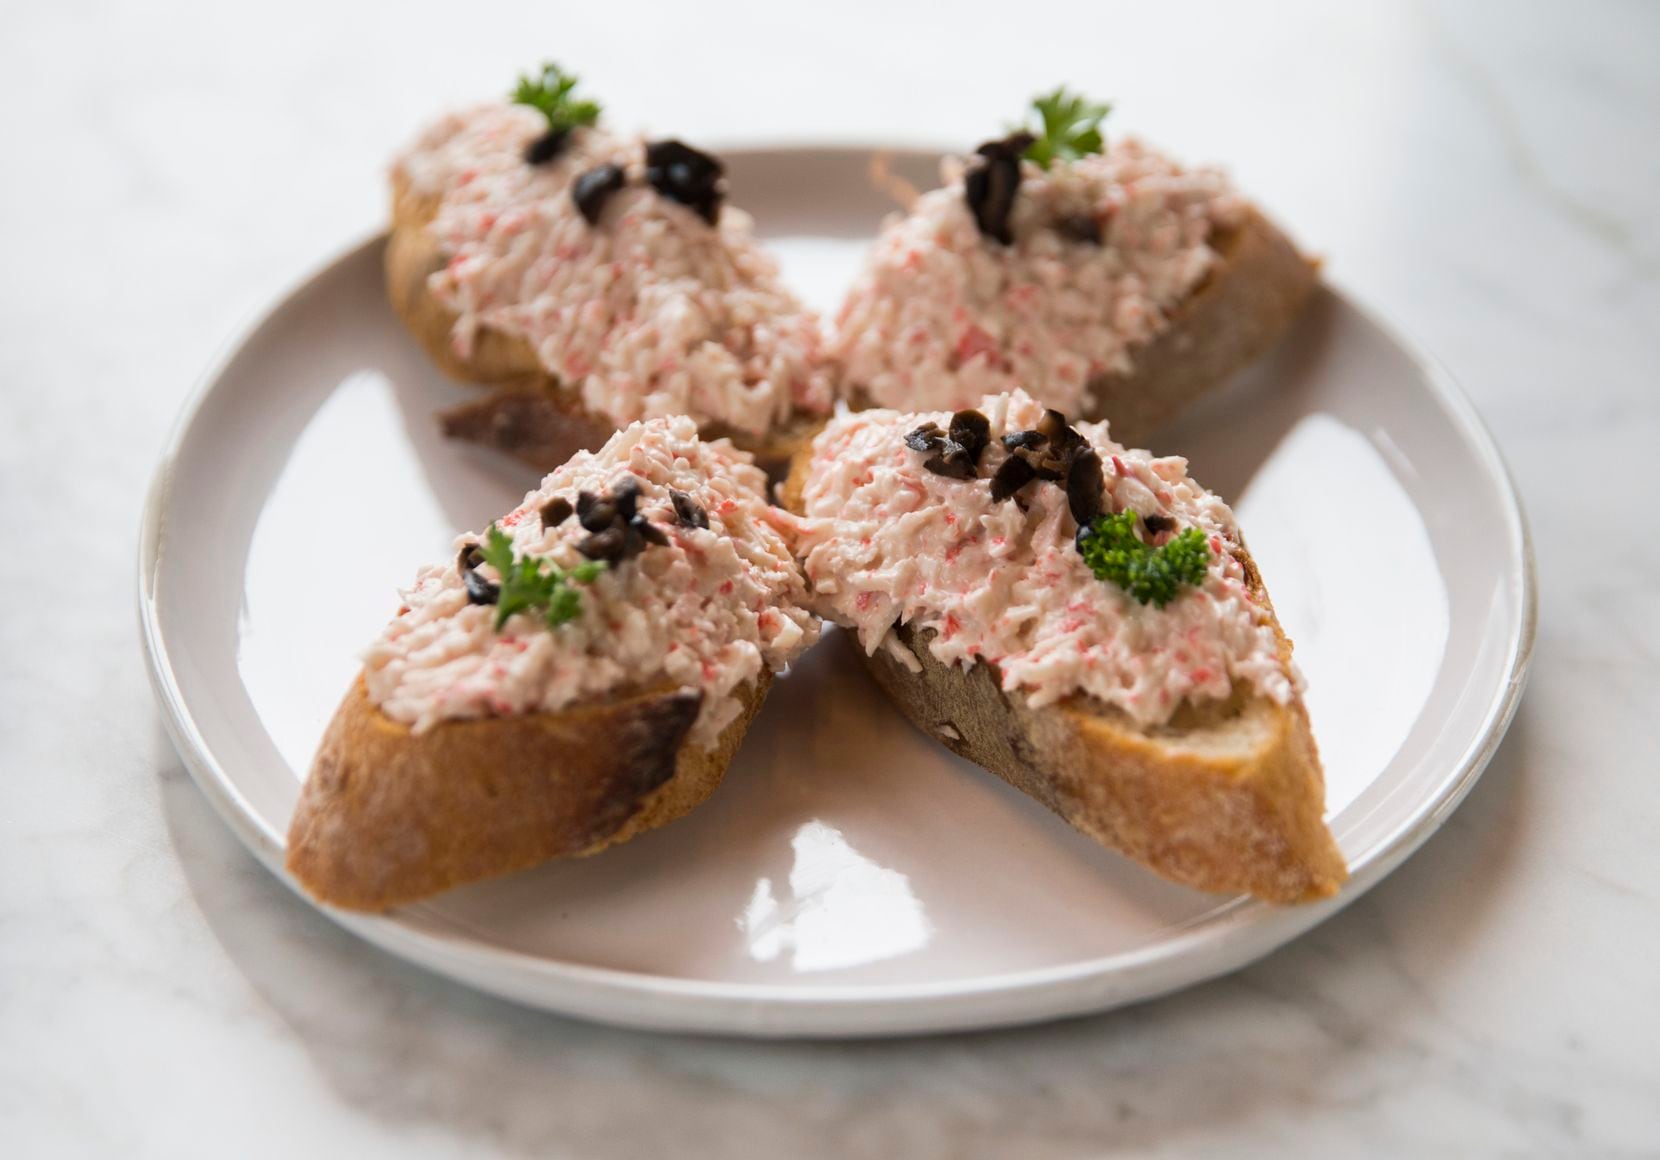 "Txaka," or imitation crab salad on baguette slices, at Sketches of Spain 